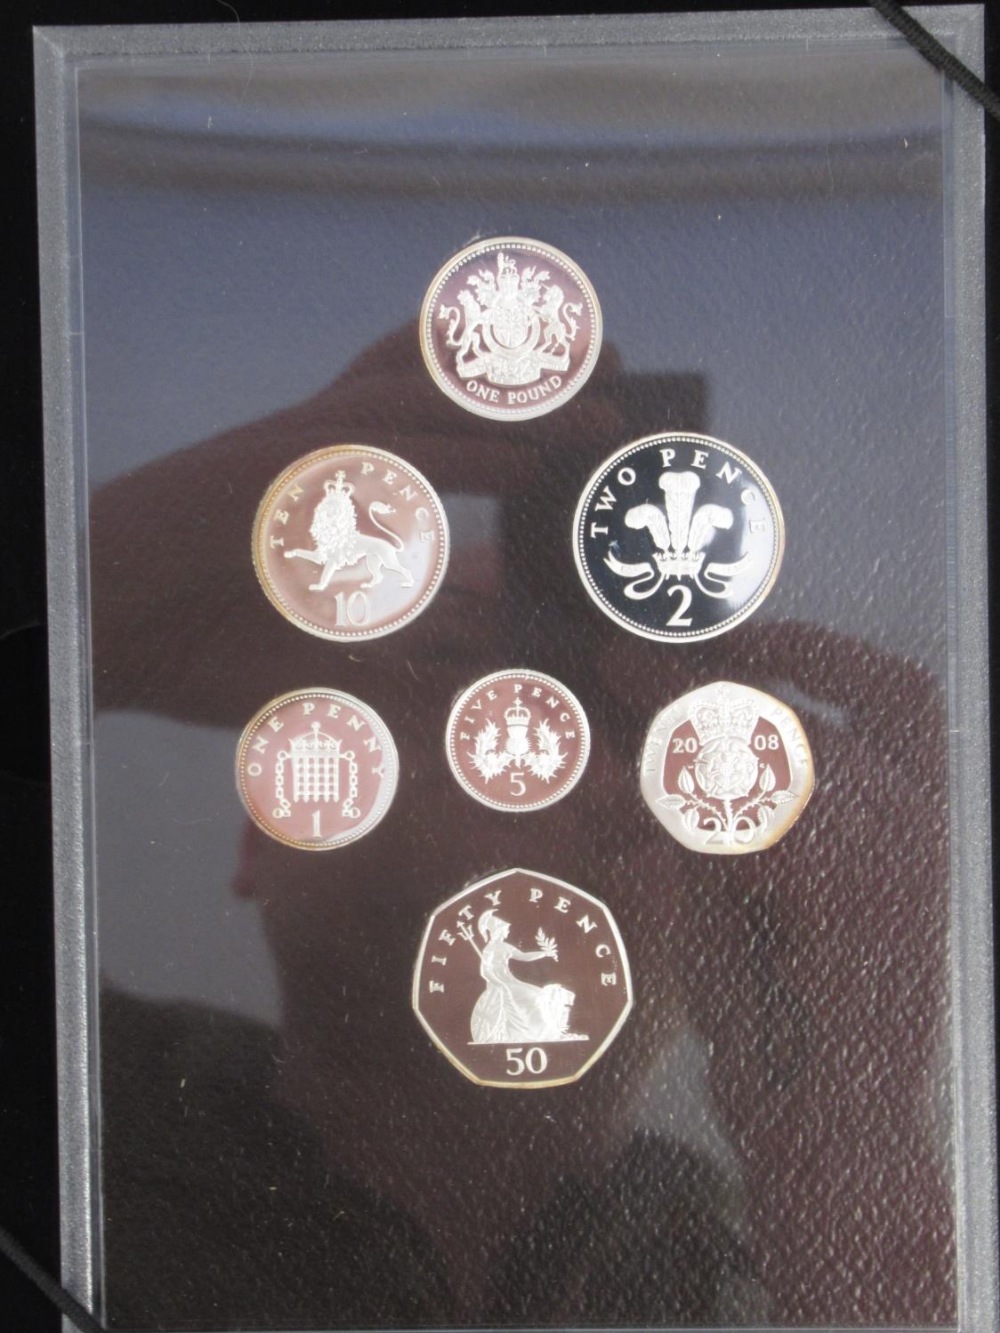 The Royal Mint - 2008 United Kingdom Coinage Royal Shield of Arms Silver Proof Collection Limited - Image 5 of 5